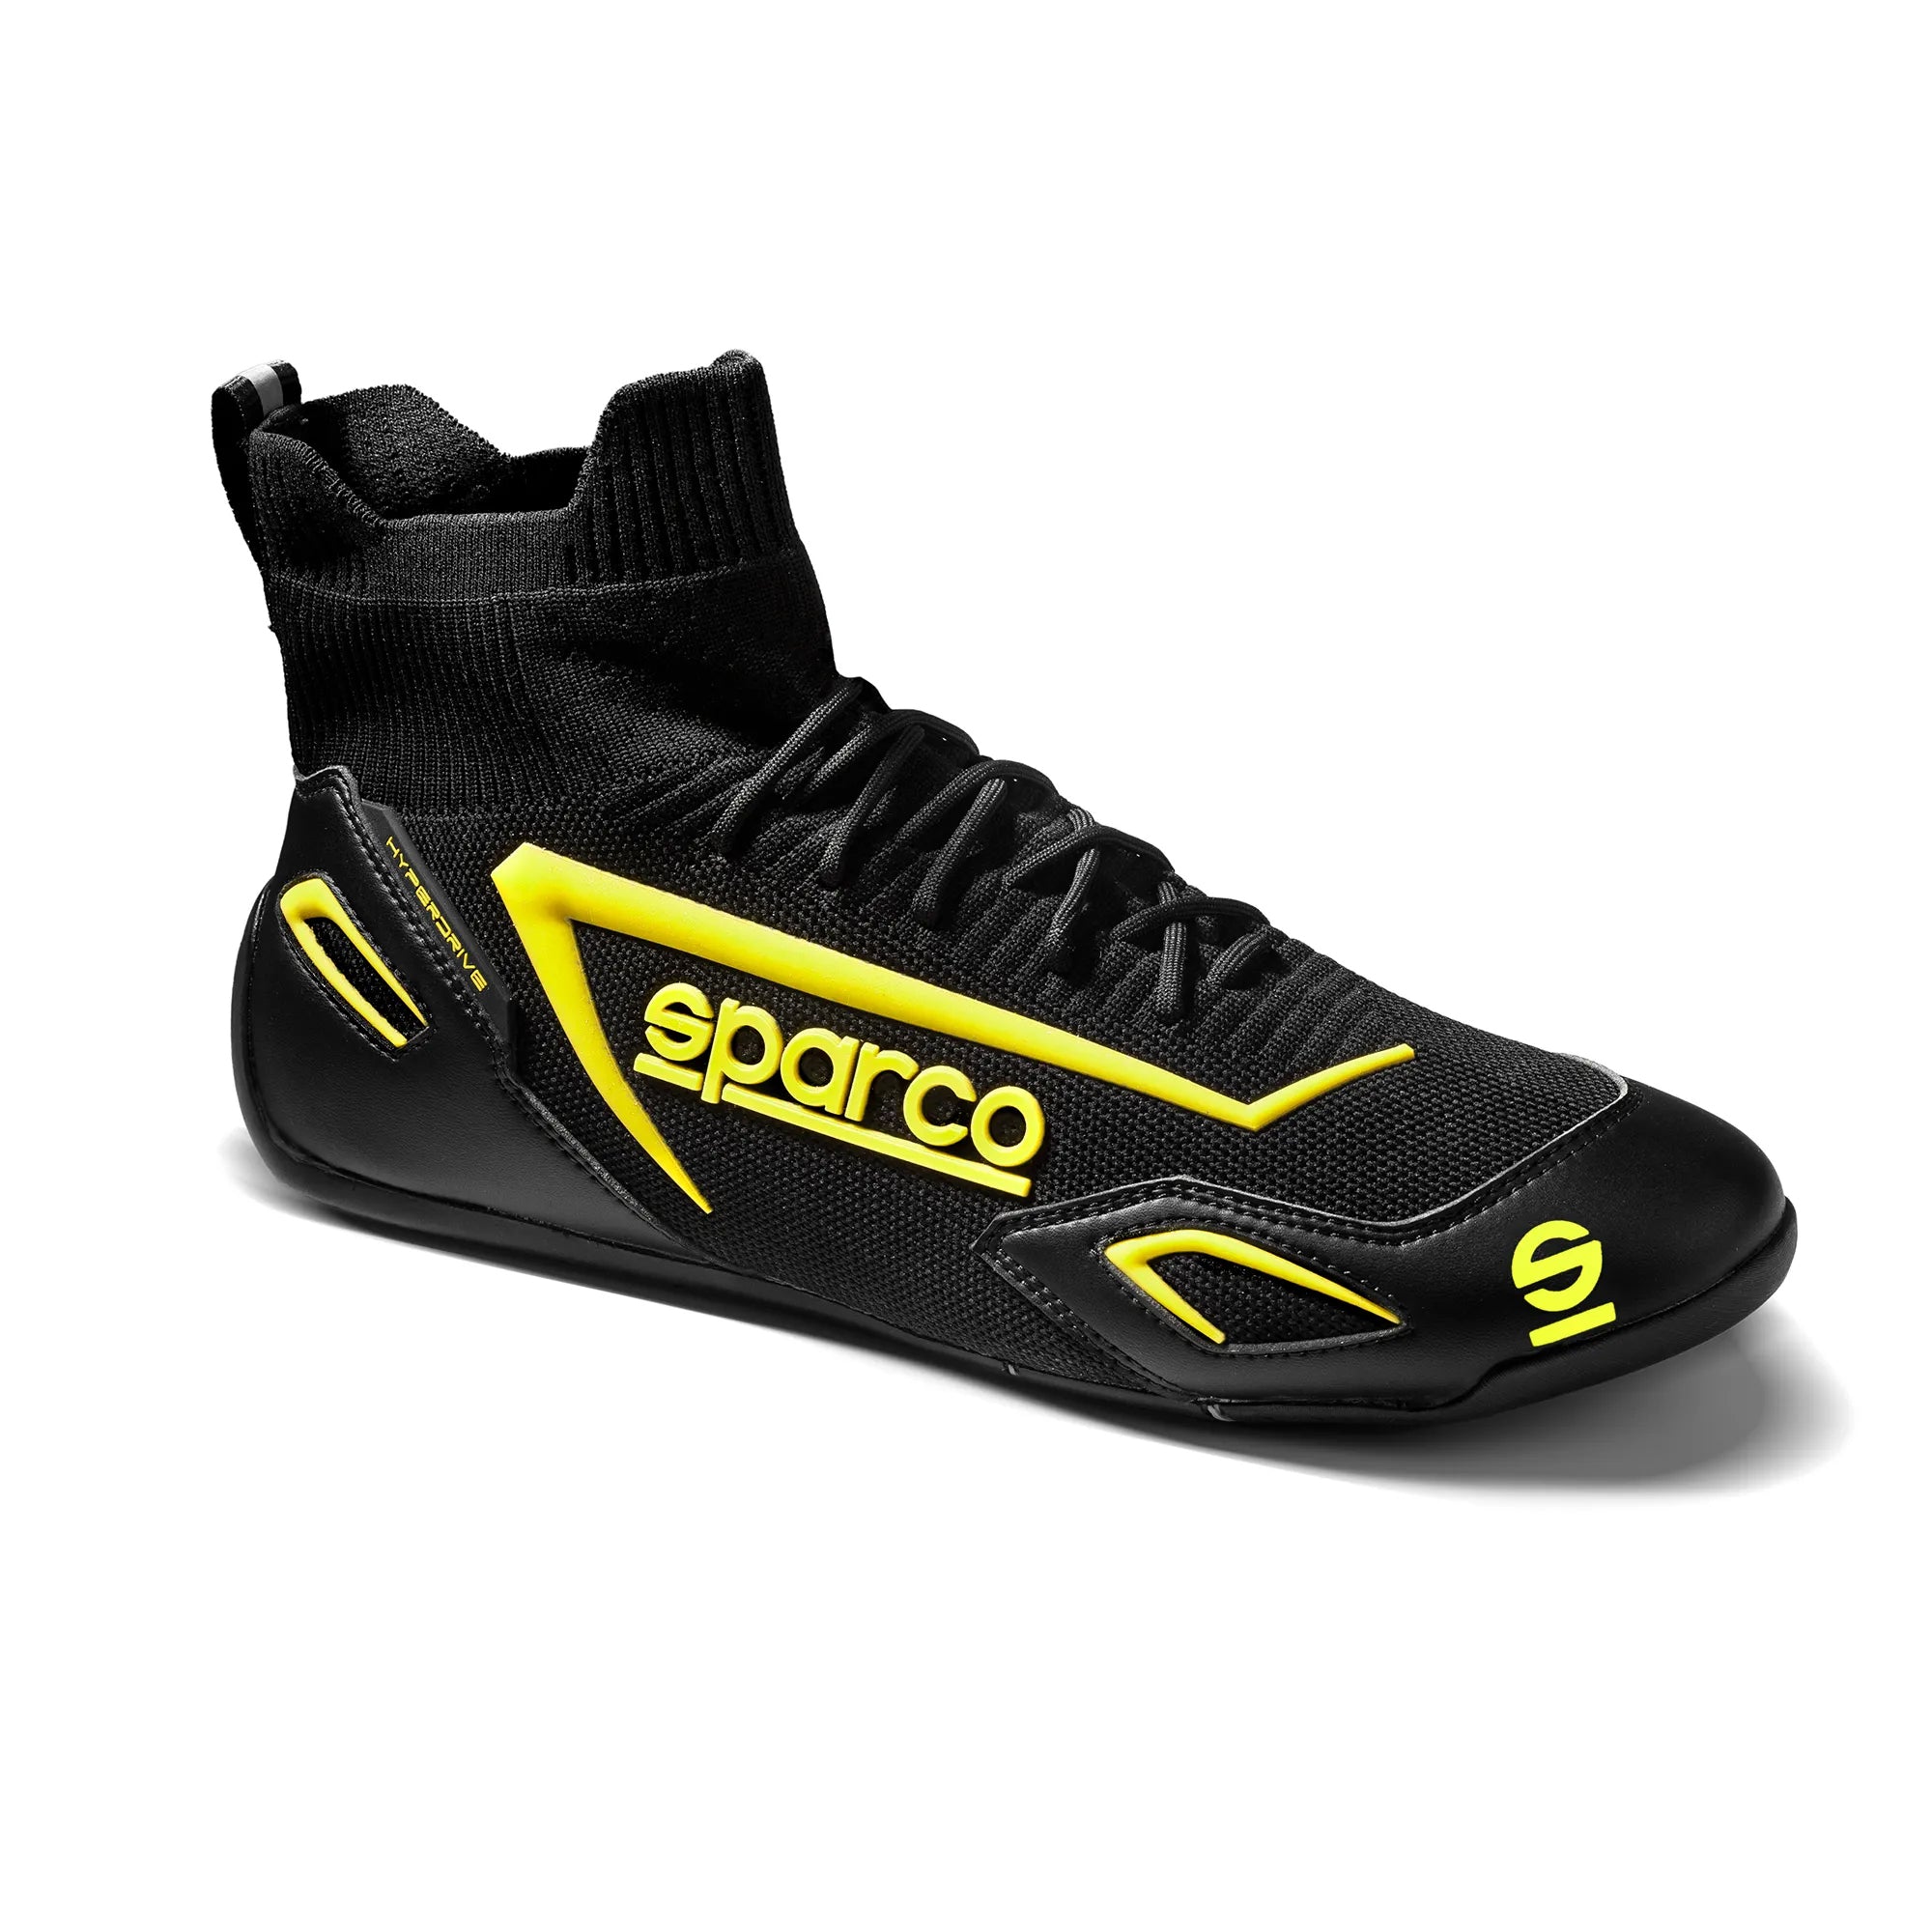 SPARCO 00129341NRGF Gaming sim racing shoes HYPERDRIVE, black/yellow, size 41 Photo-1 